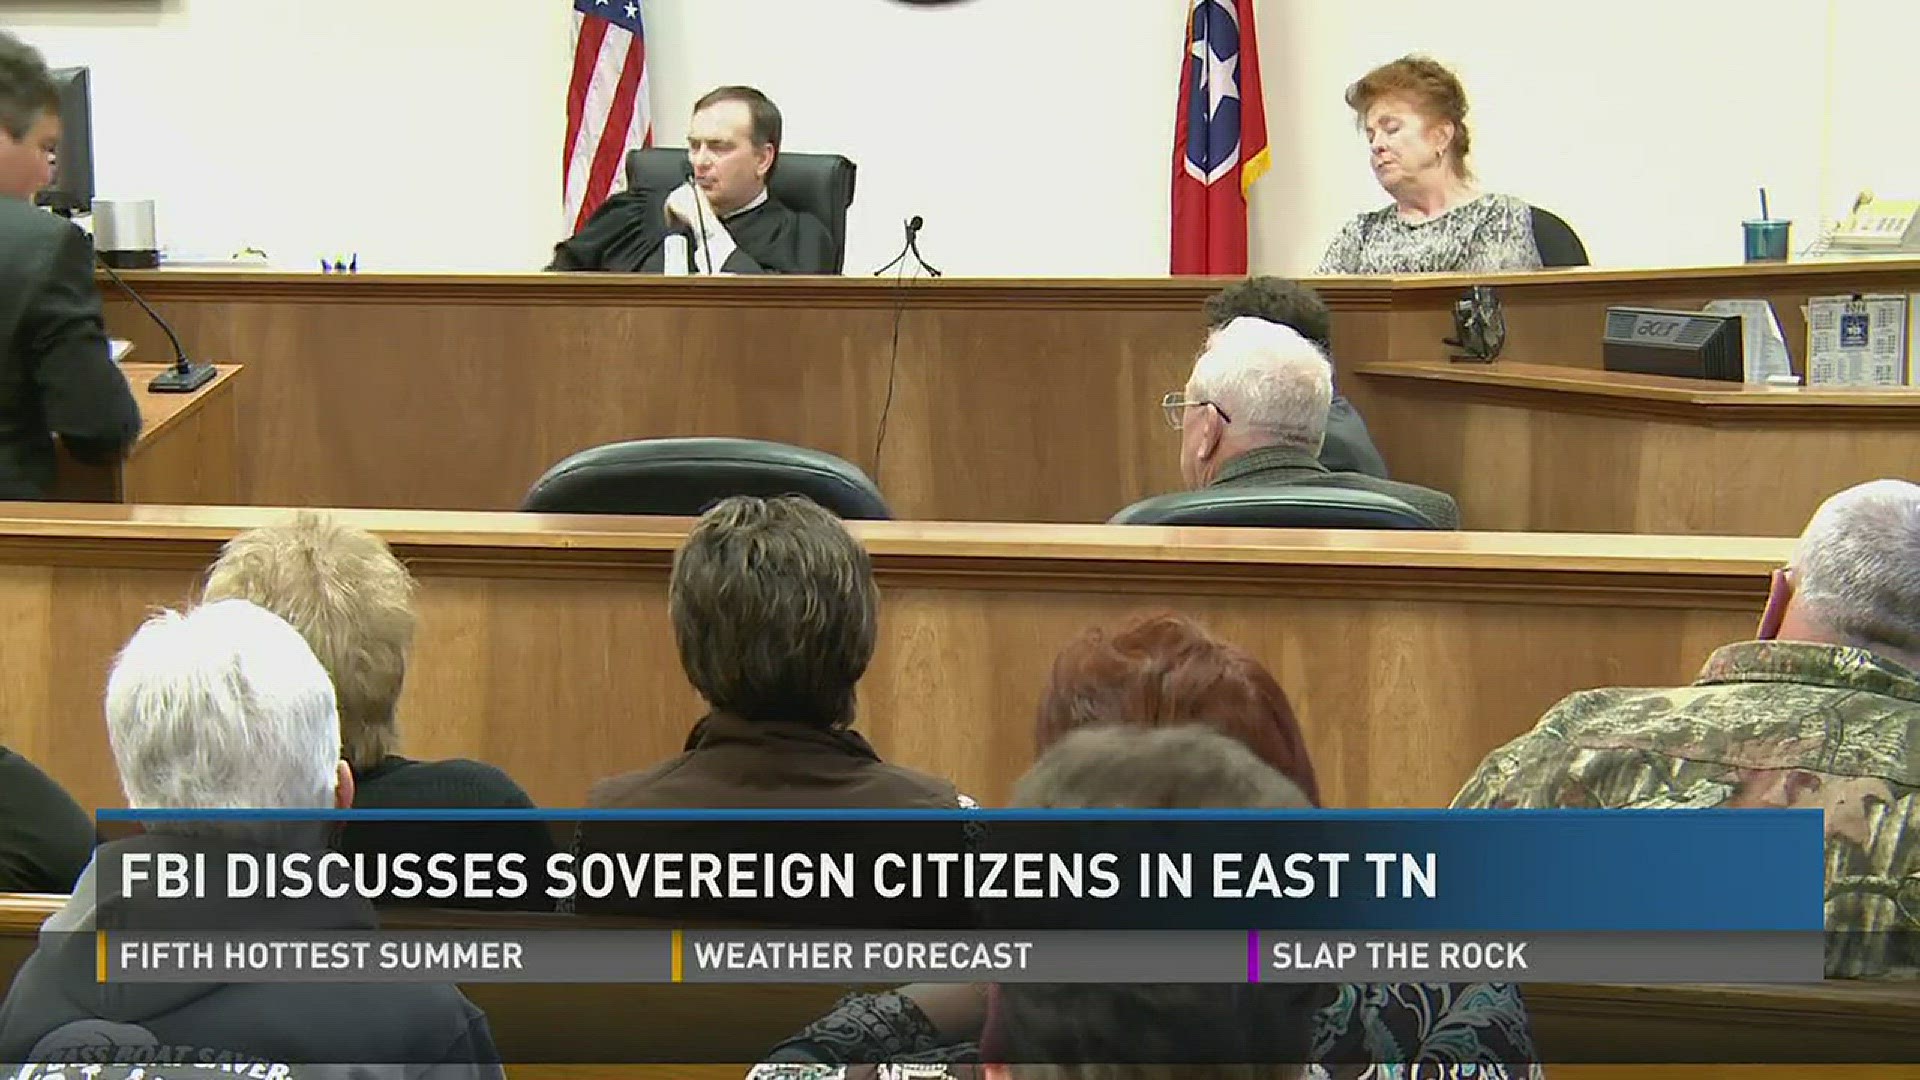 WBIR takes a look at the sovereign citizen -- or people who don't believe the U.S. has power over them -- movement in East Tennessee.